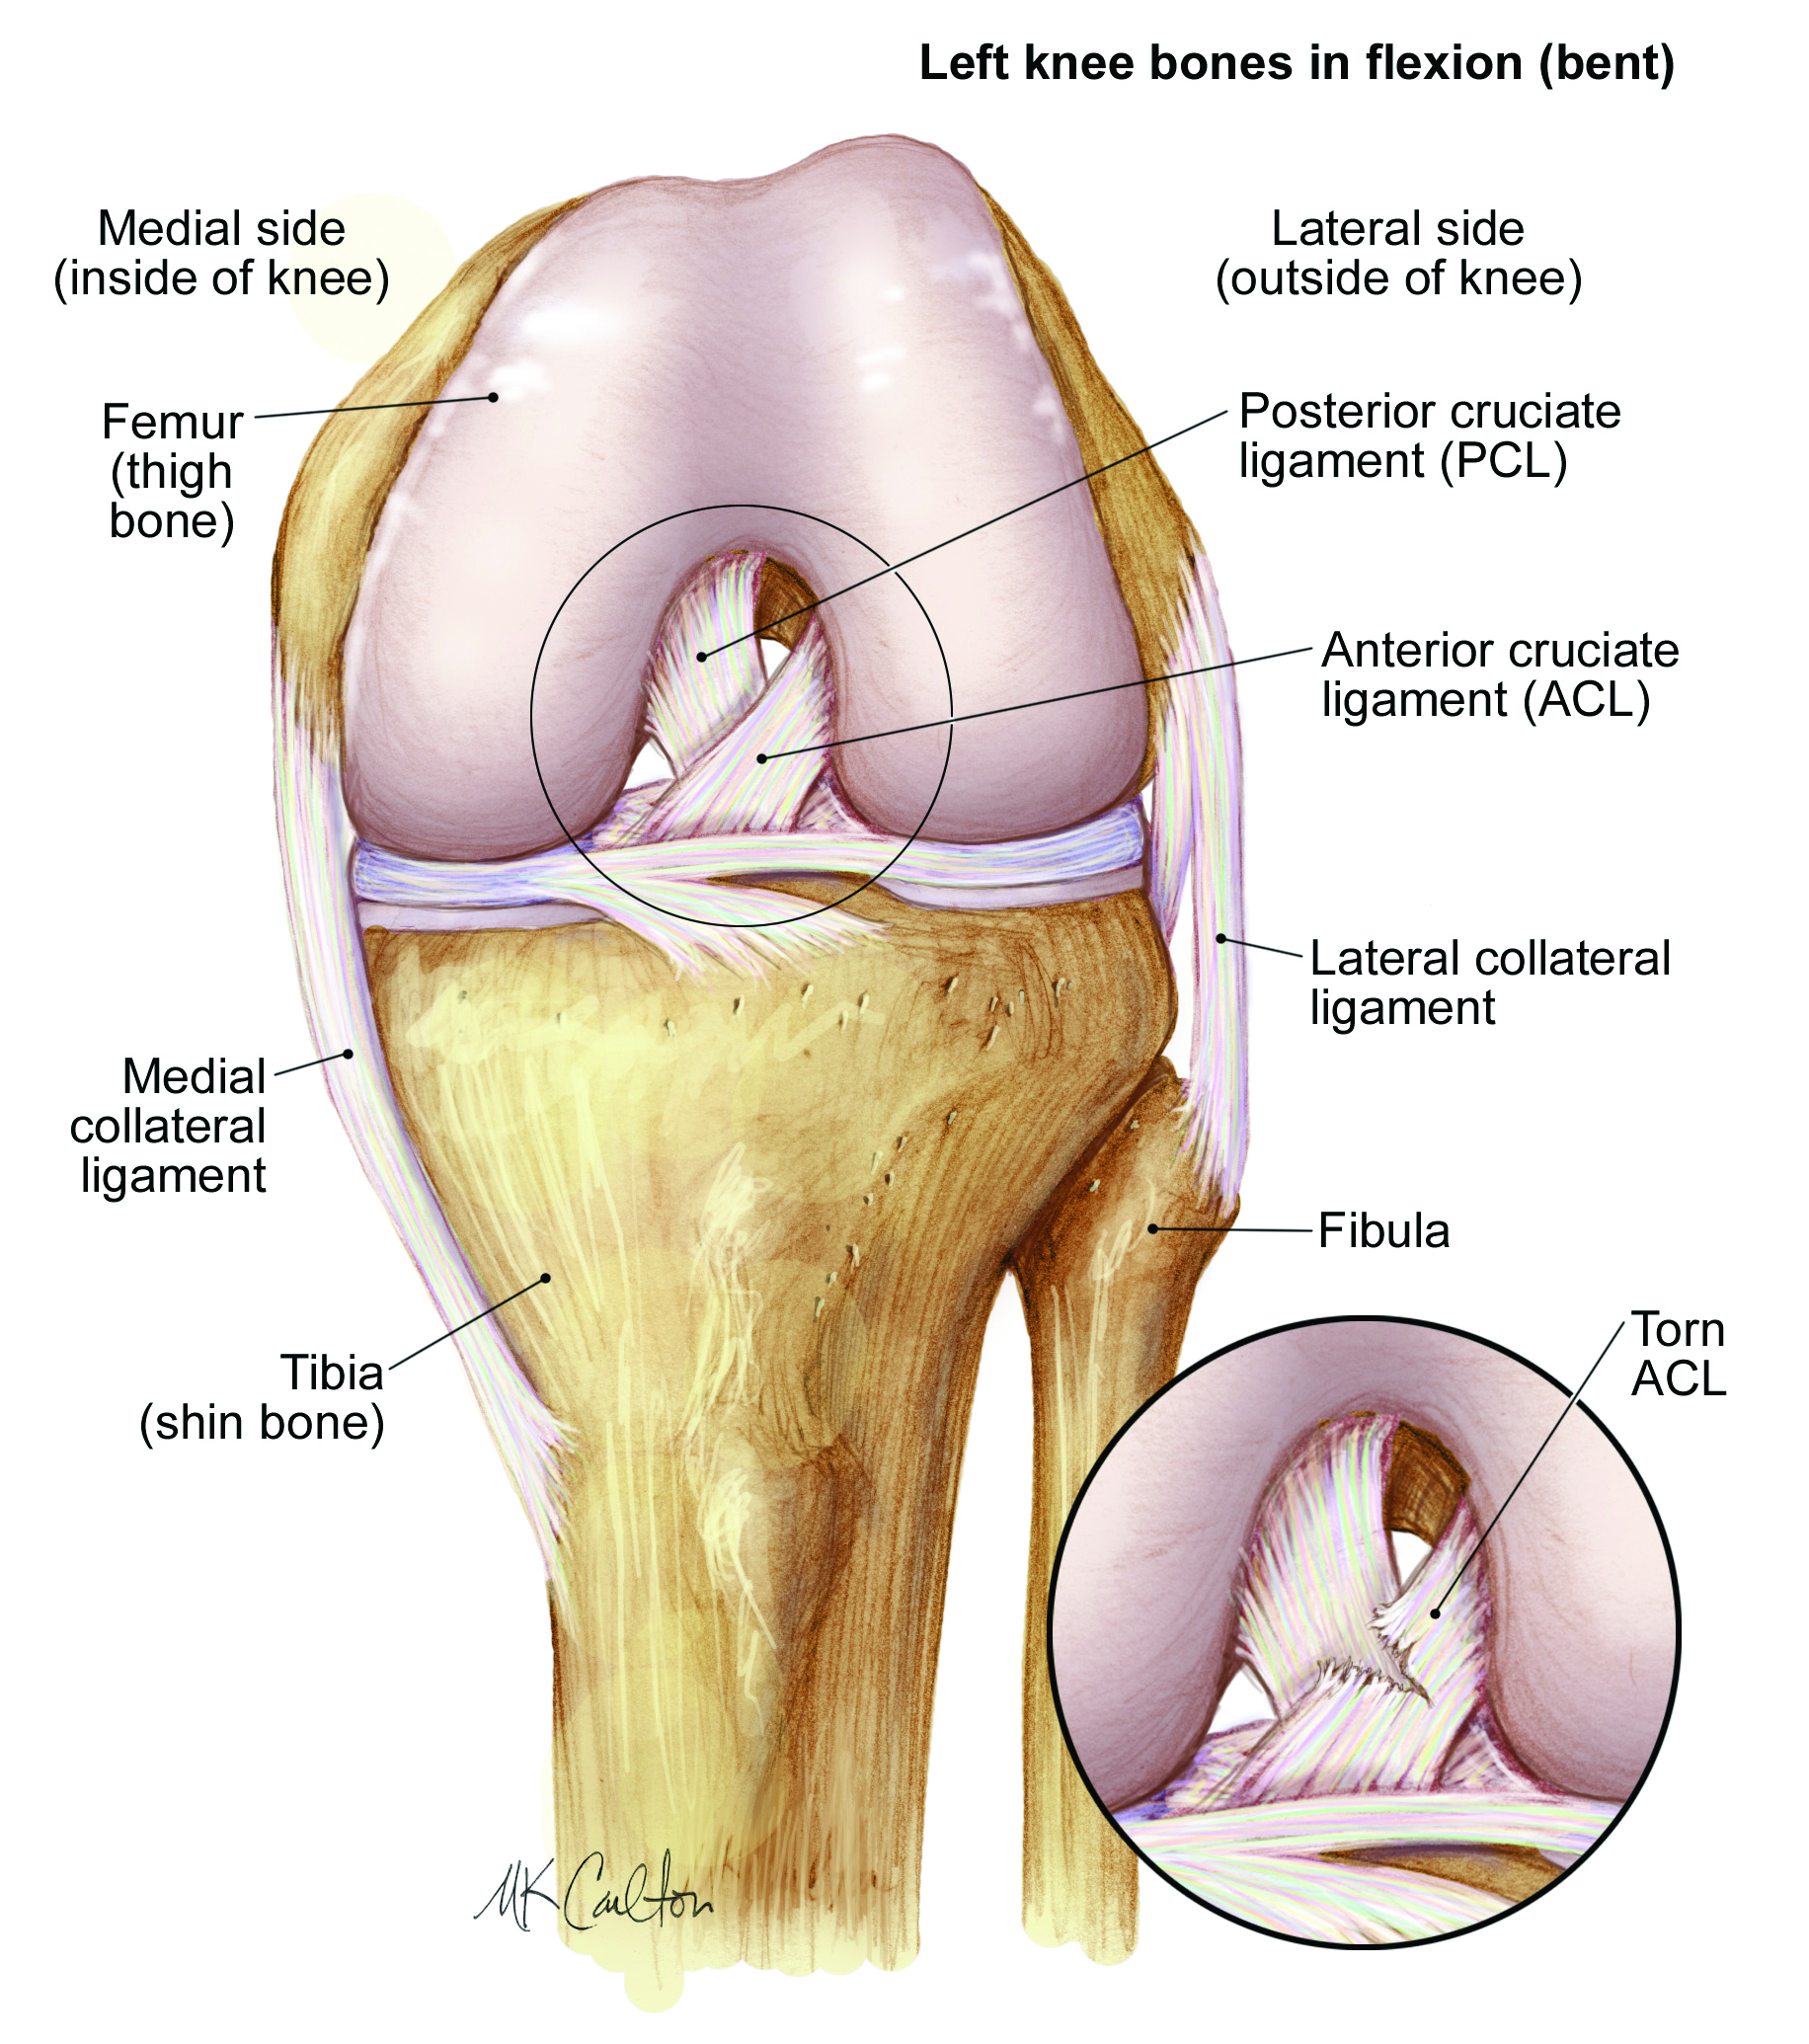 Knee ligaments and bones